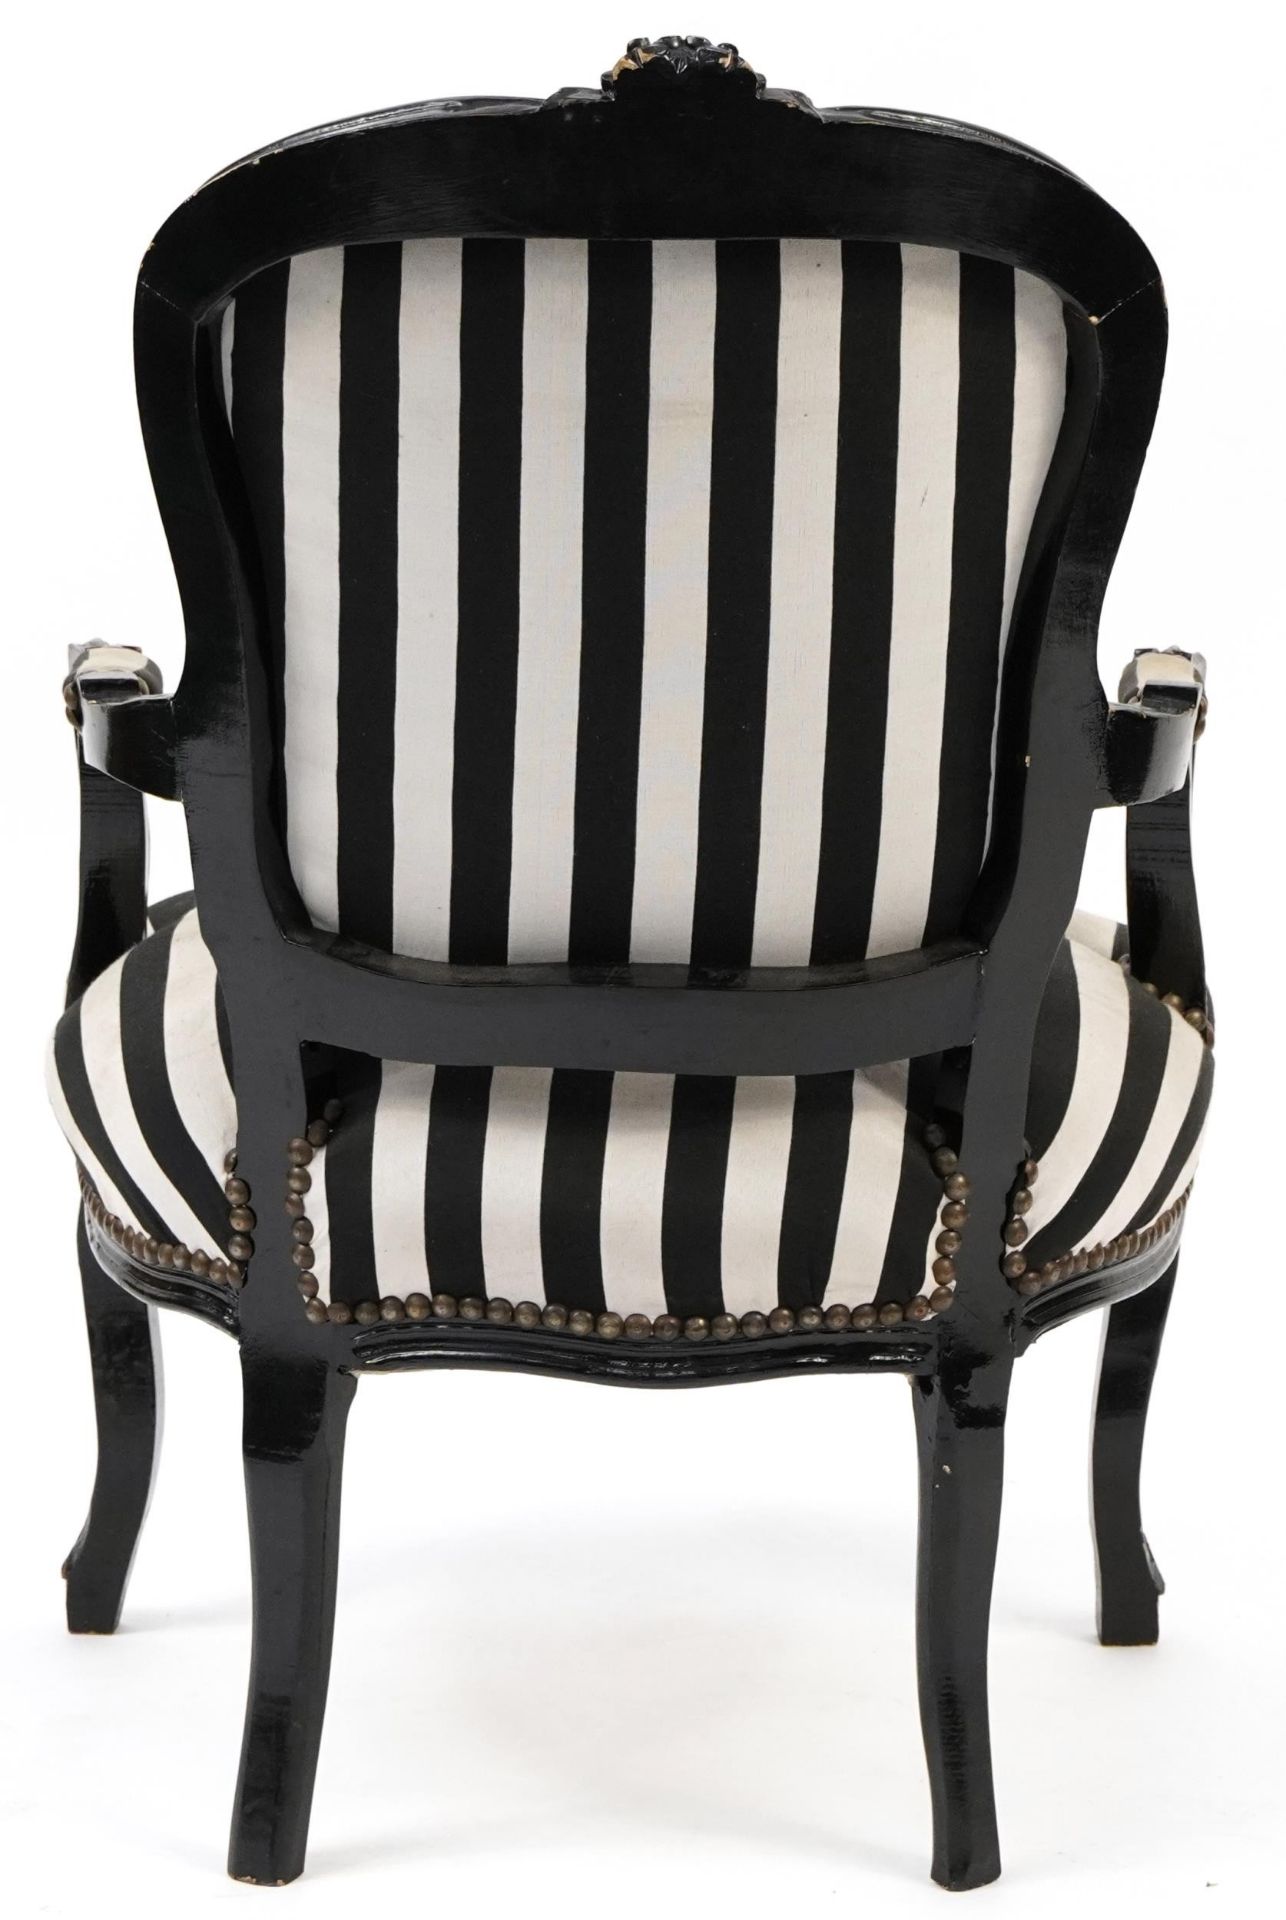 French style black painted elbow chair with black and white striped upholstery, 92cm high - Image 3 of 3